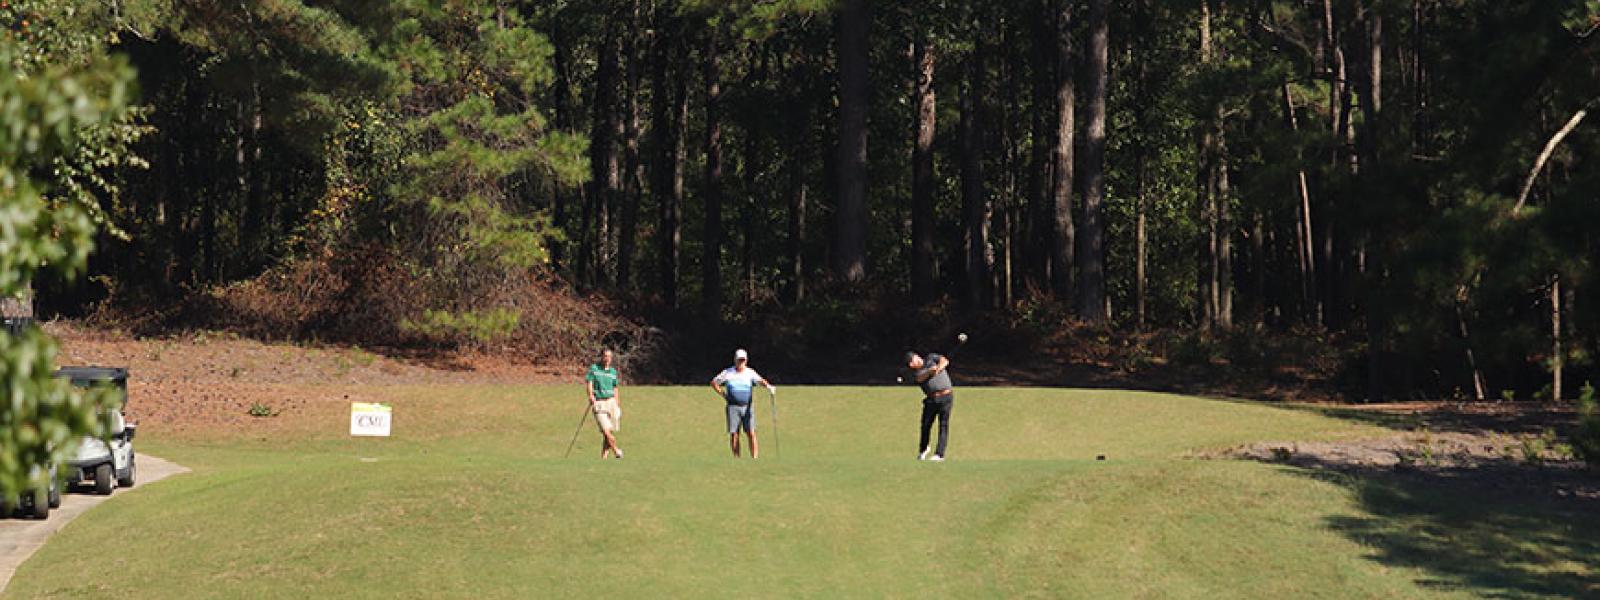 Golfers tee-off at the Columbia Country Club in the CIU Golf Classic